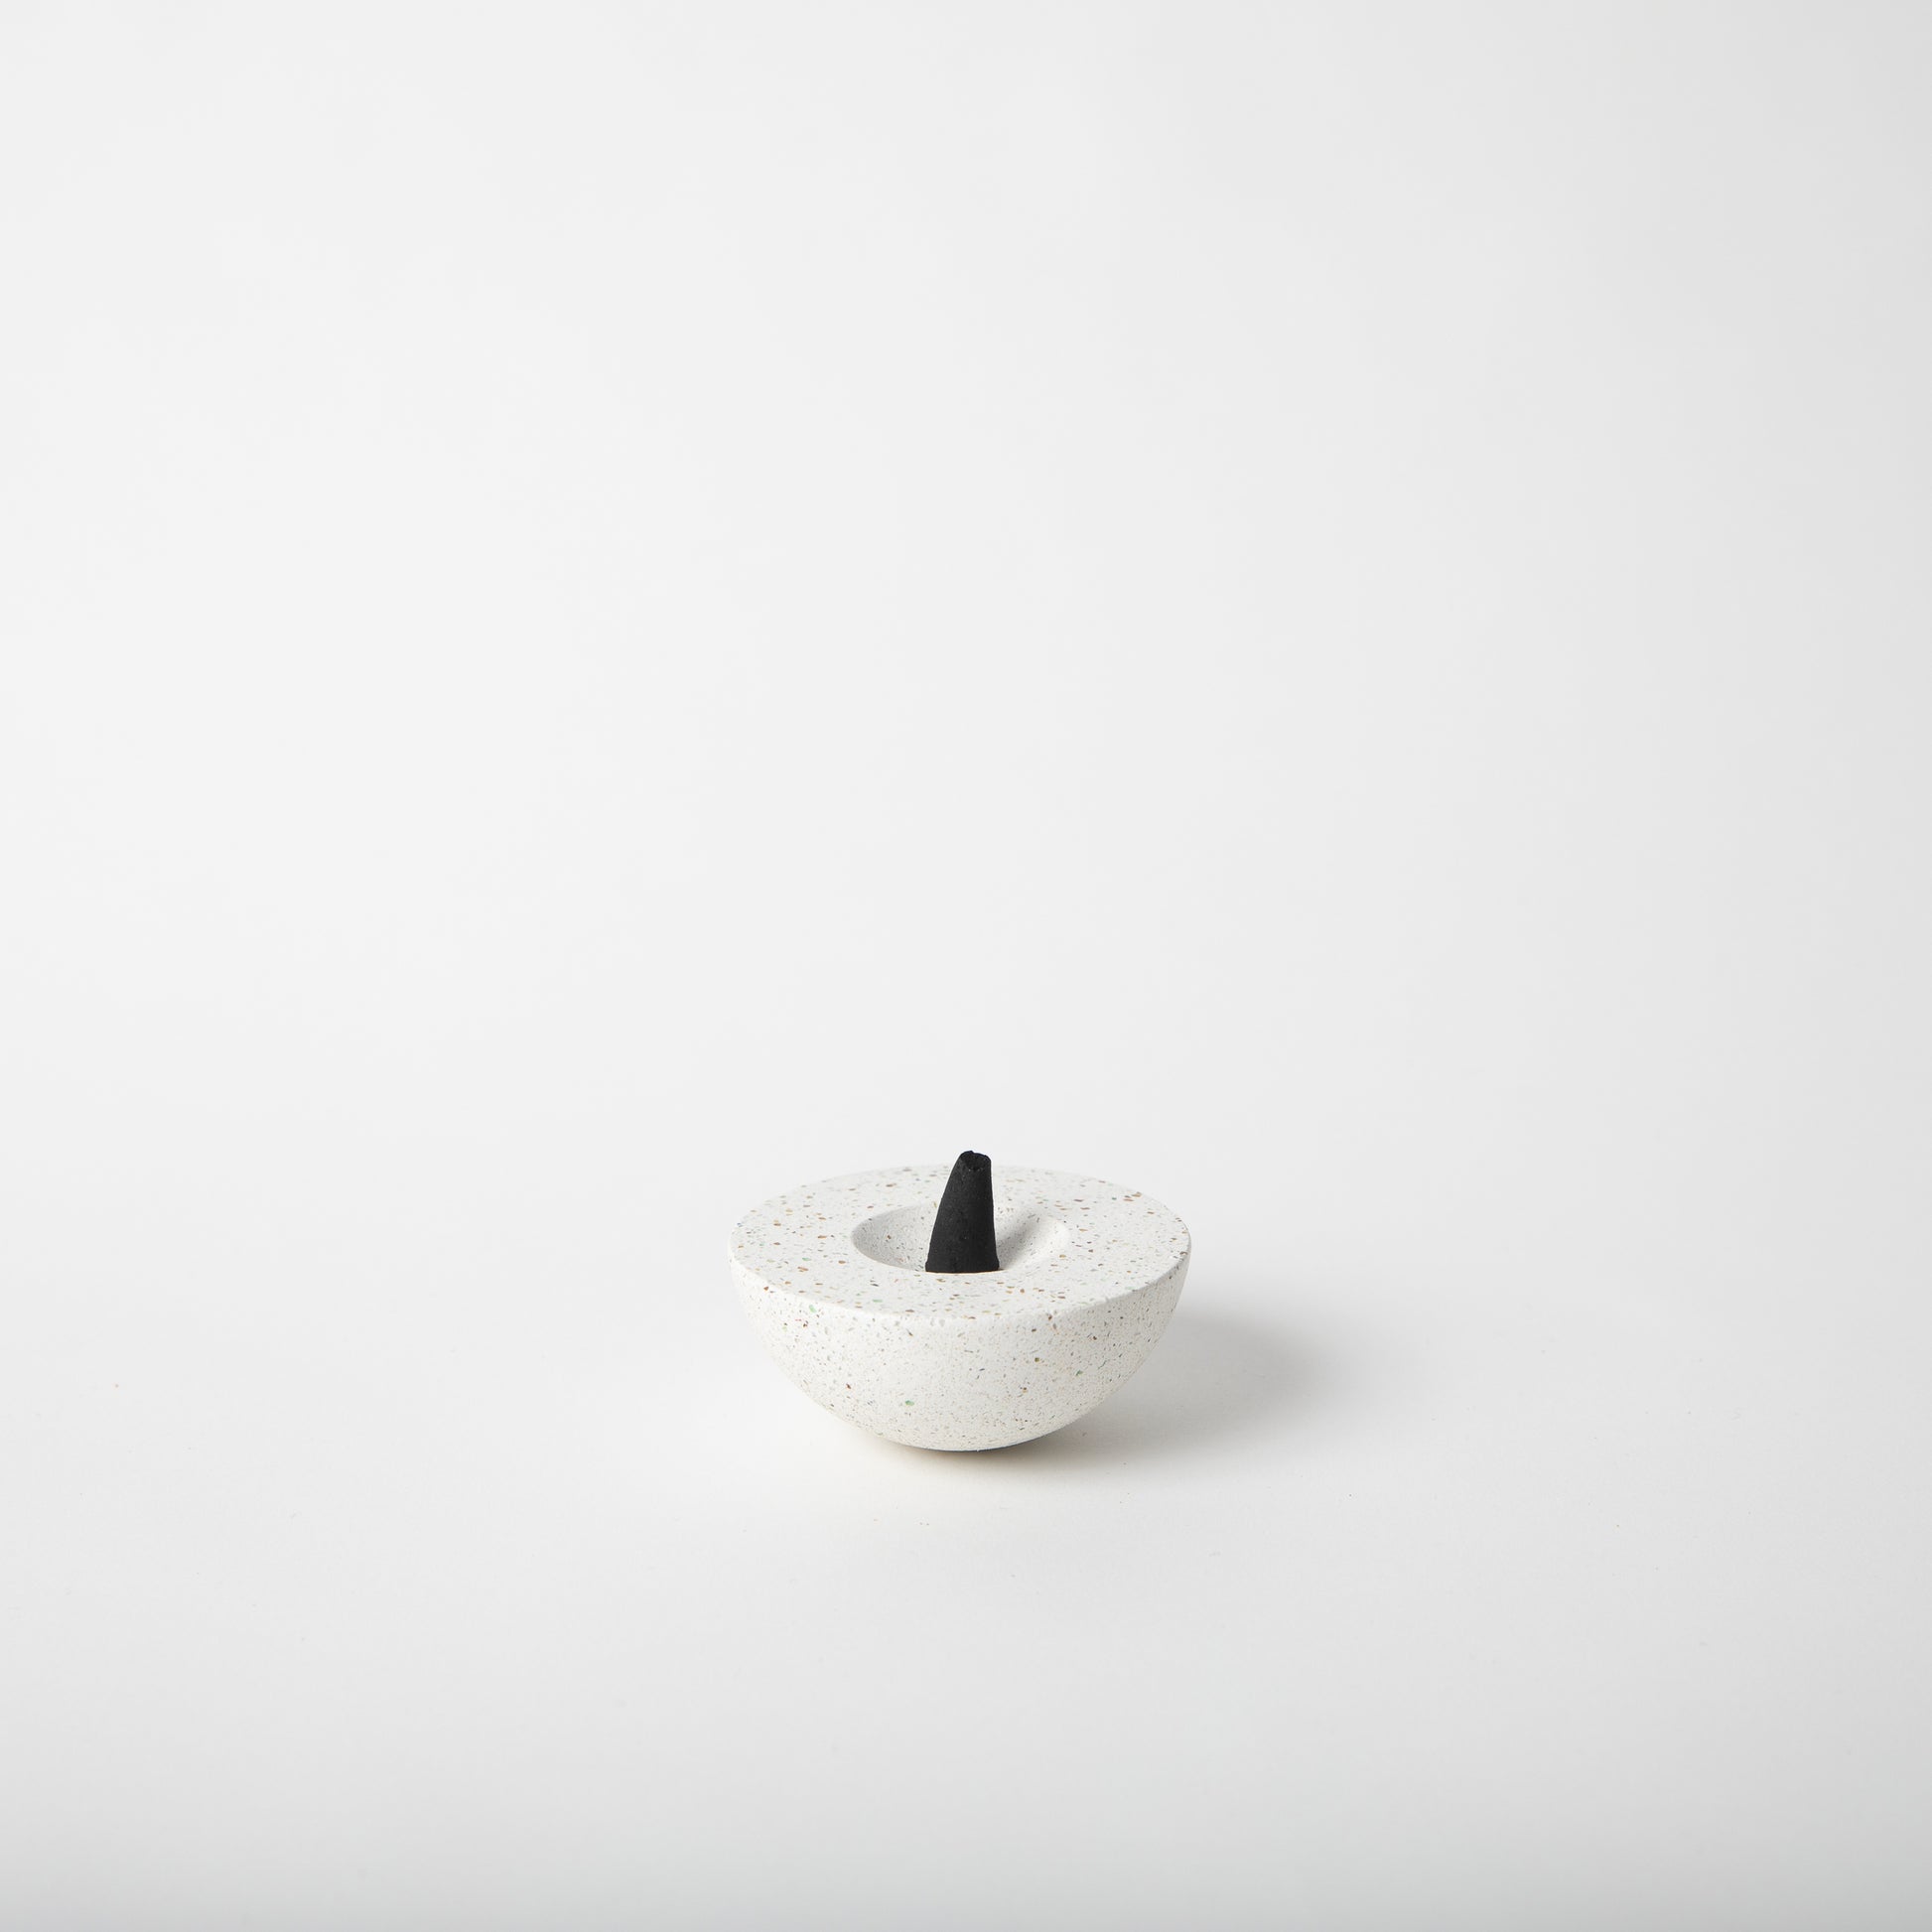 Half sphere shaped incense holder in white terrazzo. Shown holding incense cone.